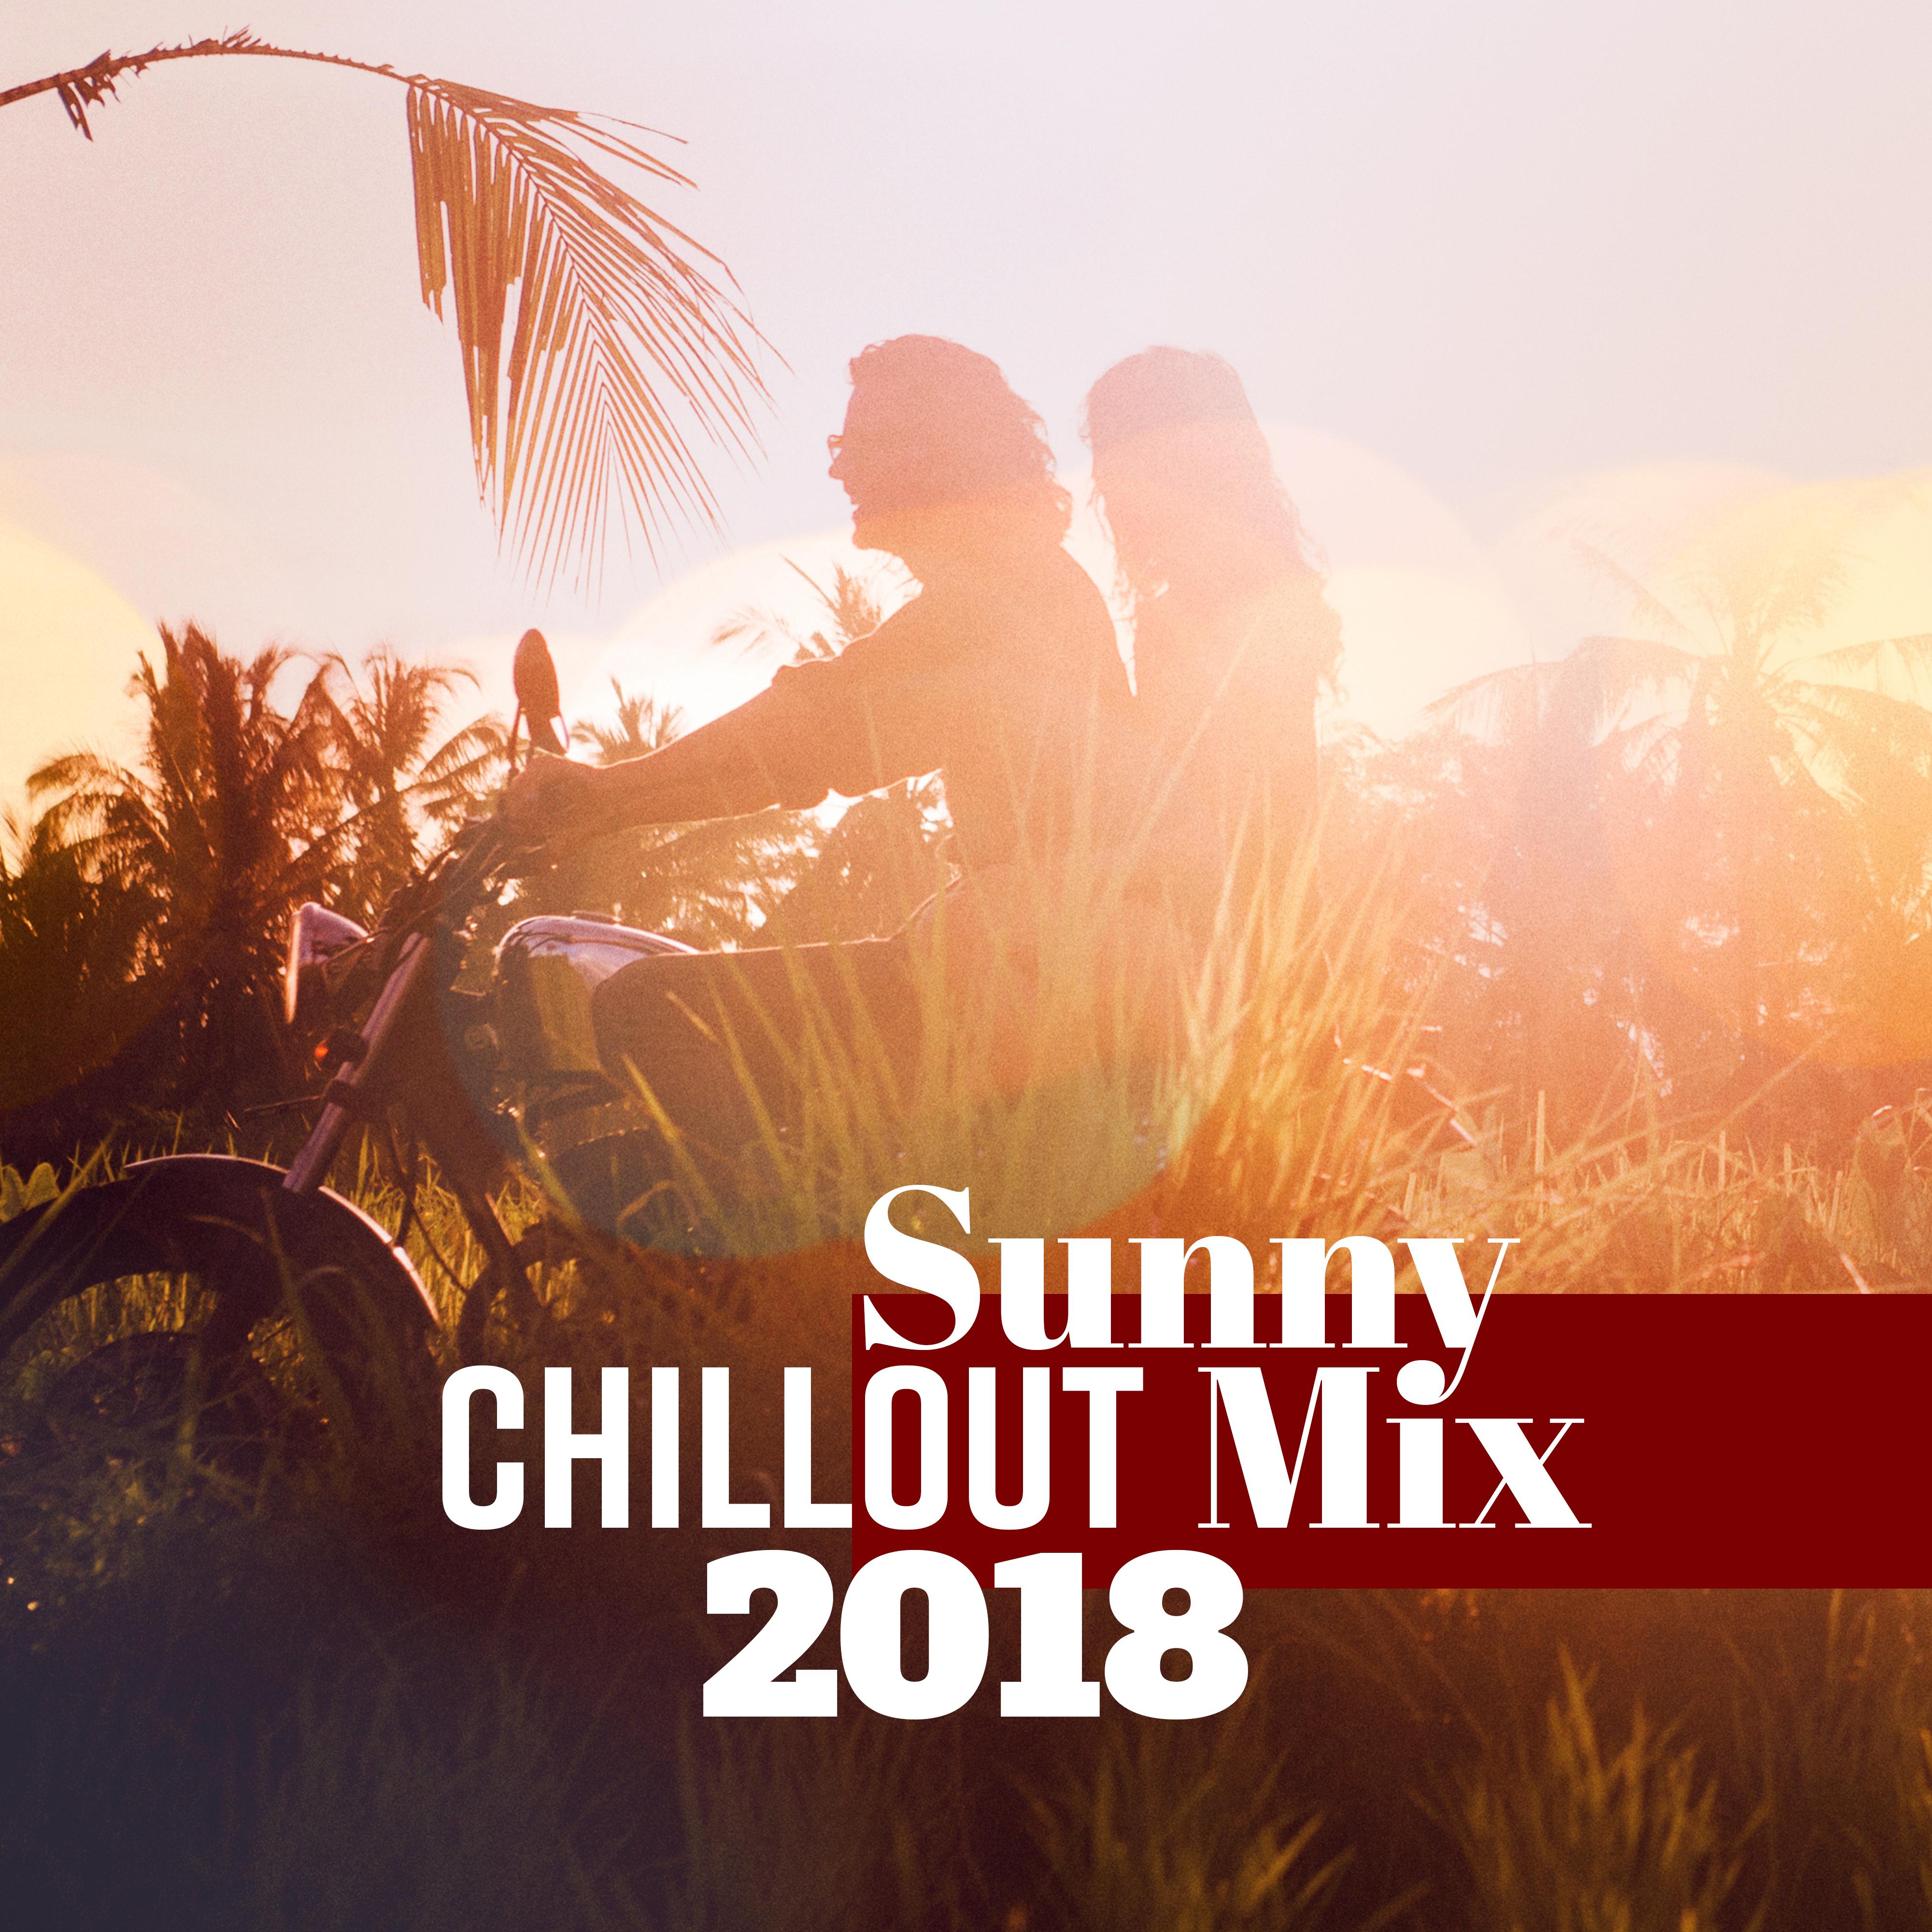 Sunny Chillout Mix 2018